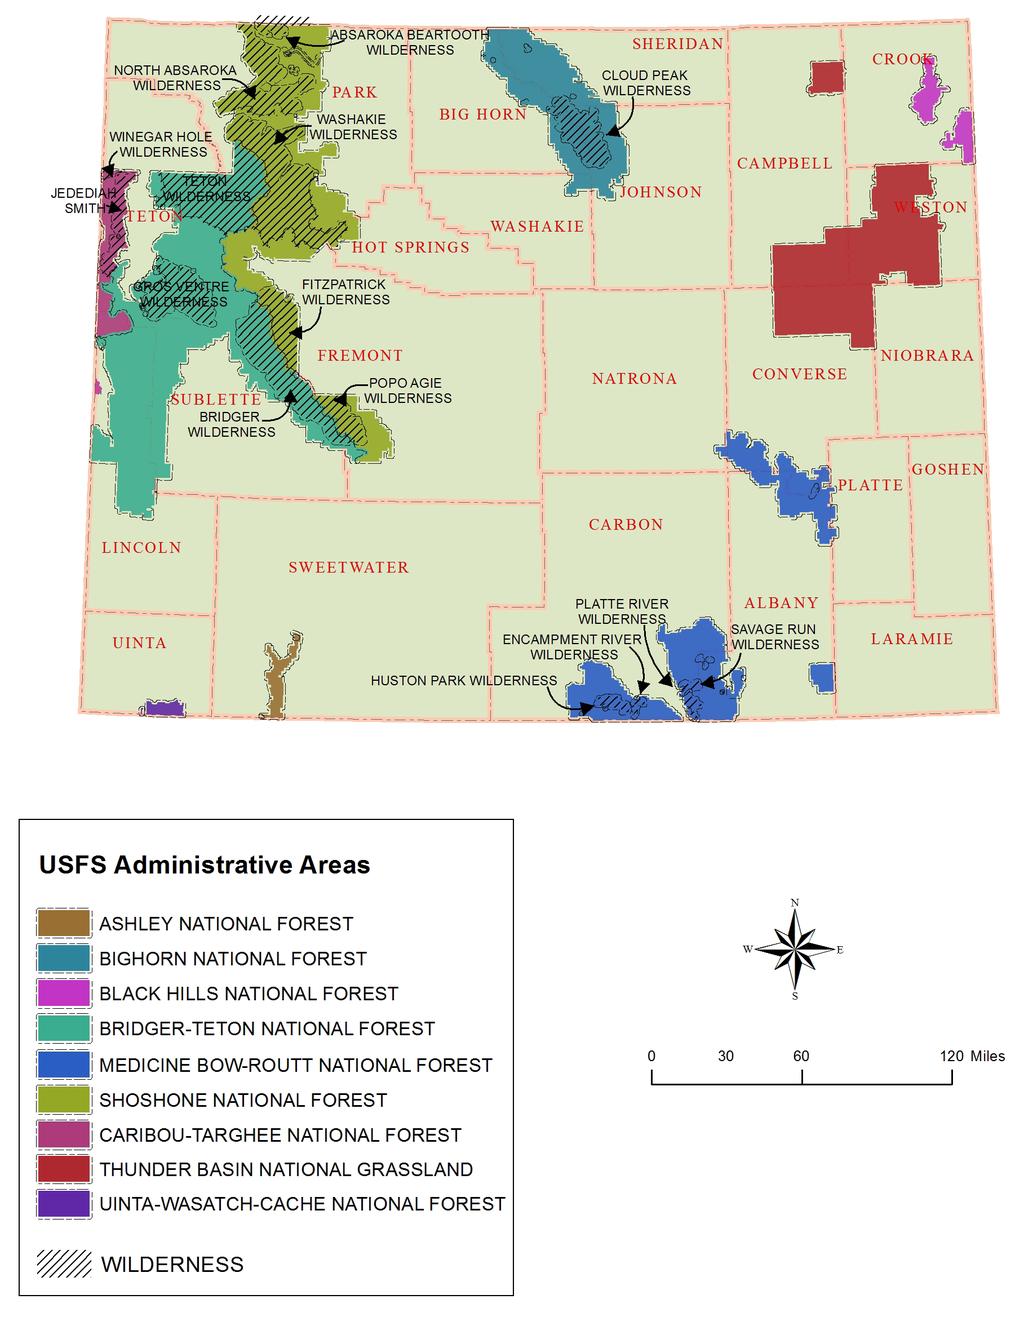 U.S. DEPARTMENT OF AGRICULTURE - UNITED STATES FOREST SERVICE The USFS manages 9.7 million acres (Figure 2) of land in Wyoming roughly 15% of the state.